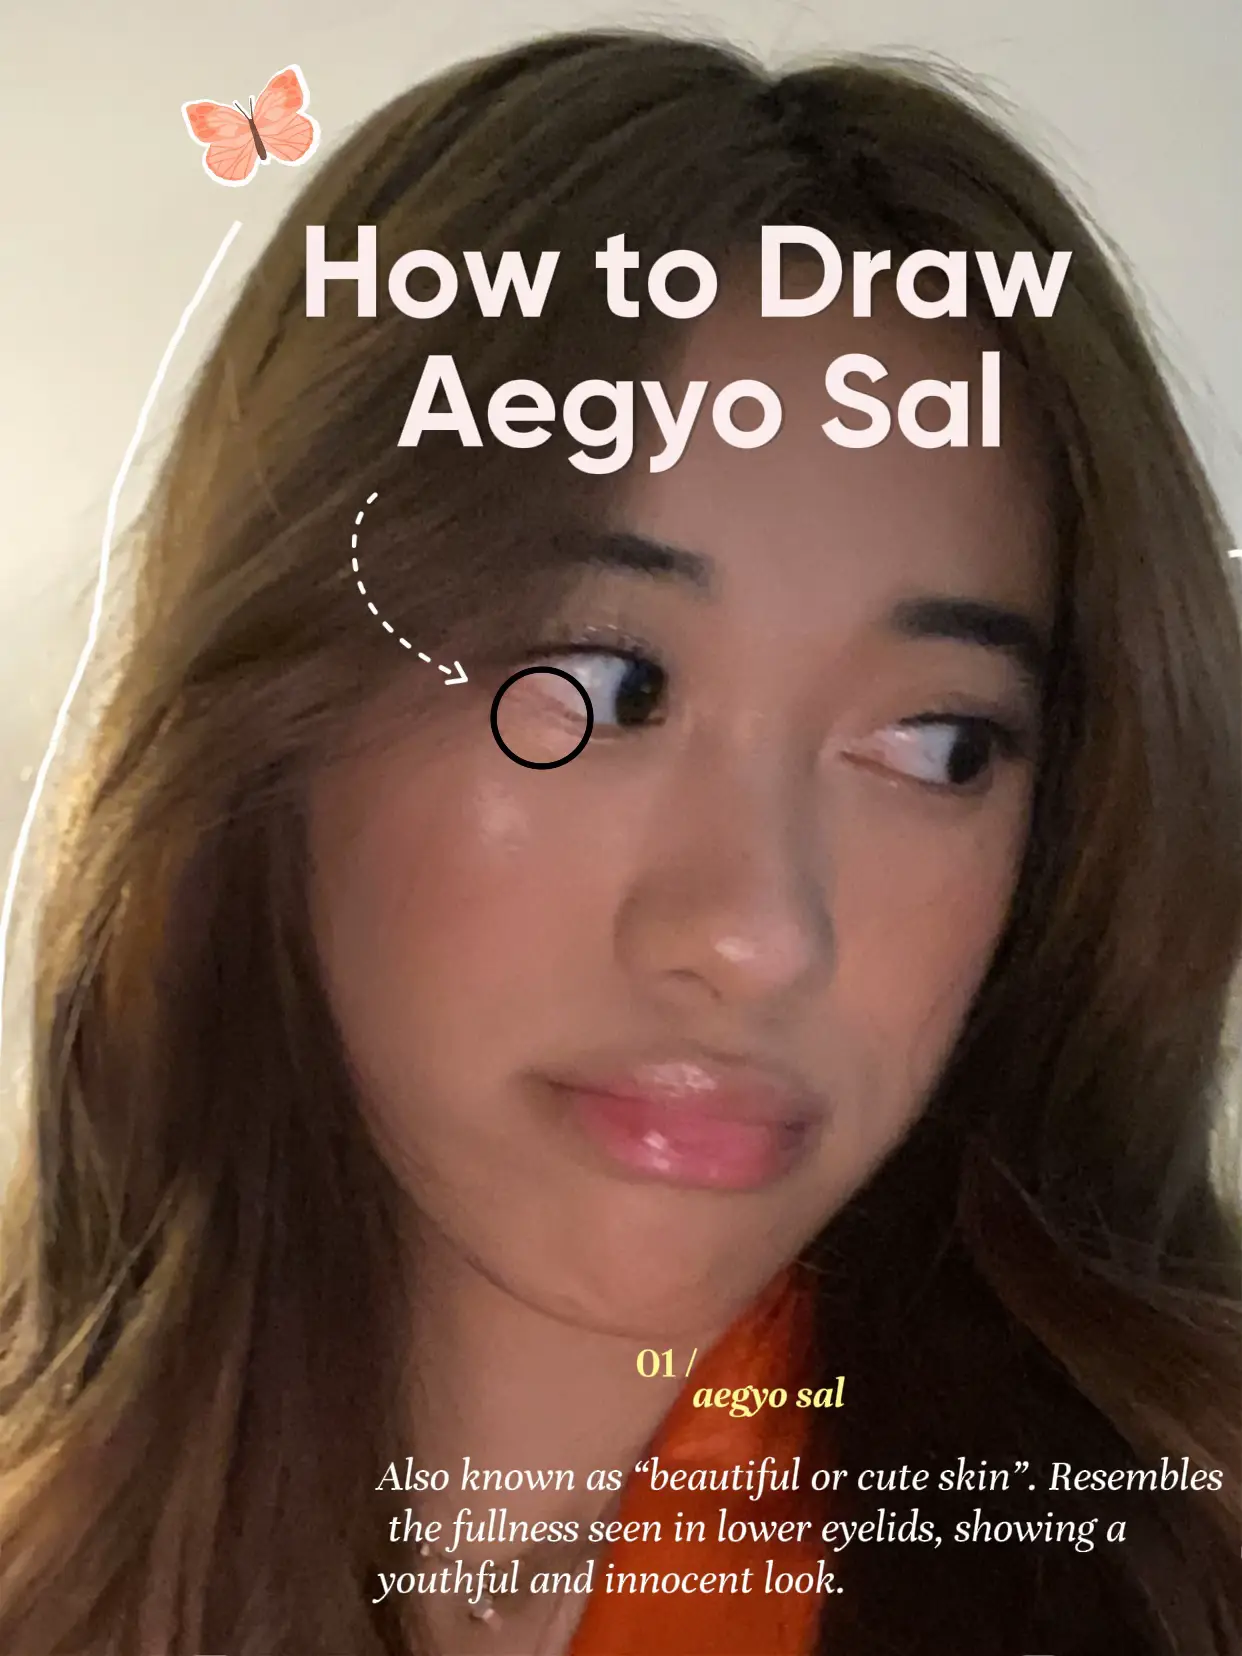 How To Draw Aegyo Sal Gallery